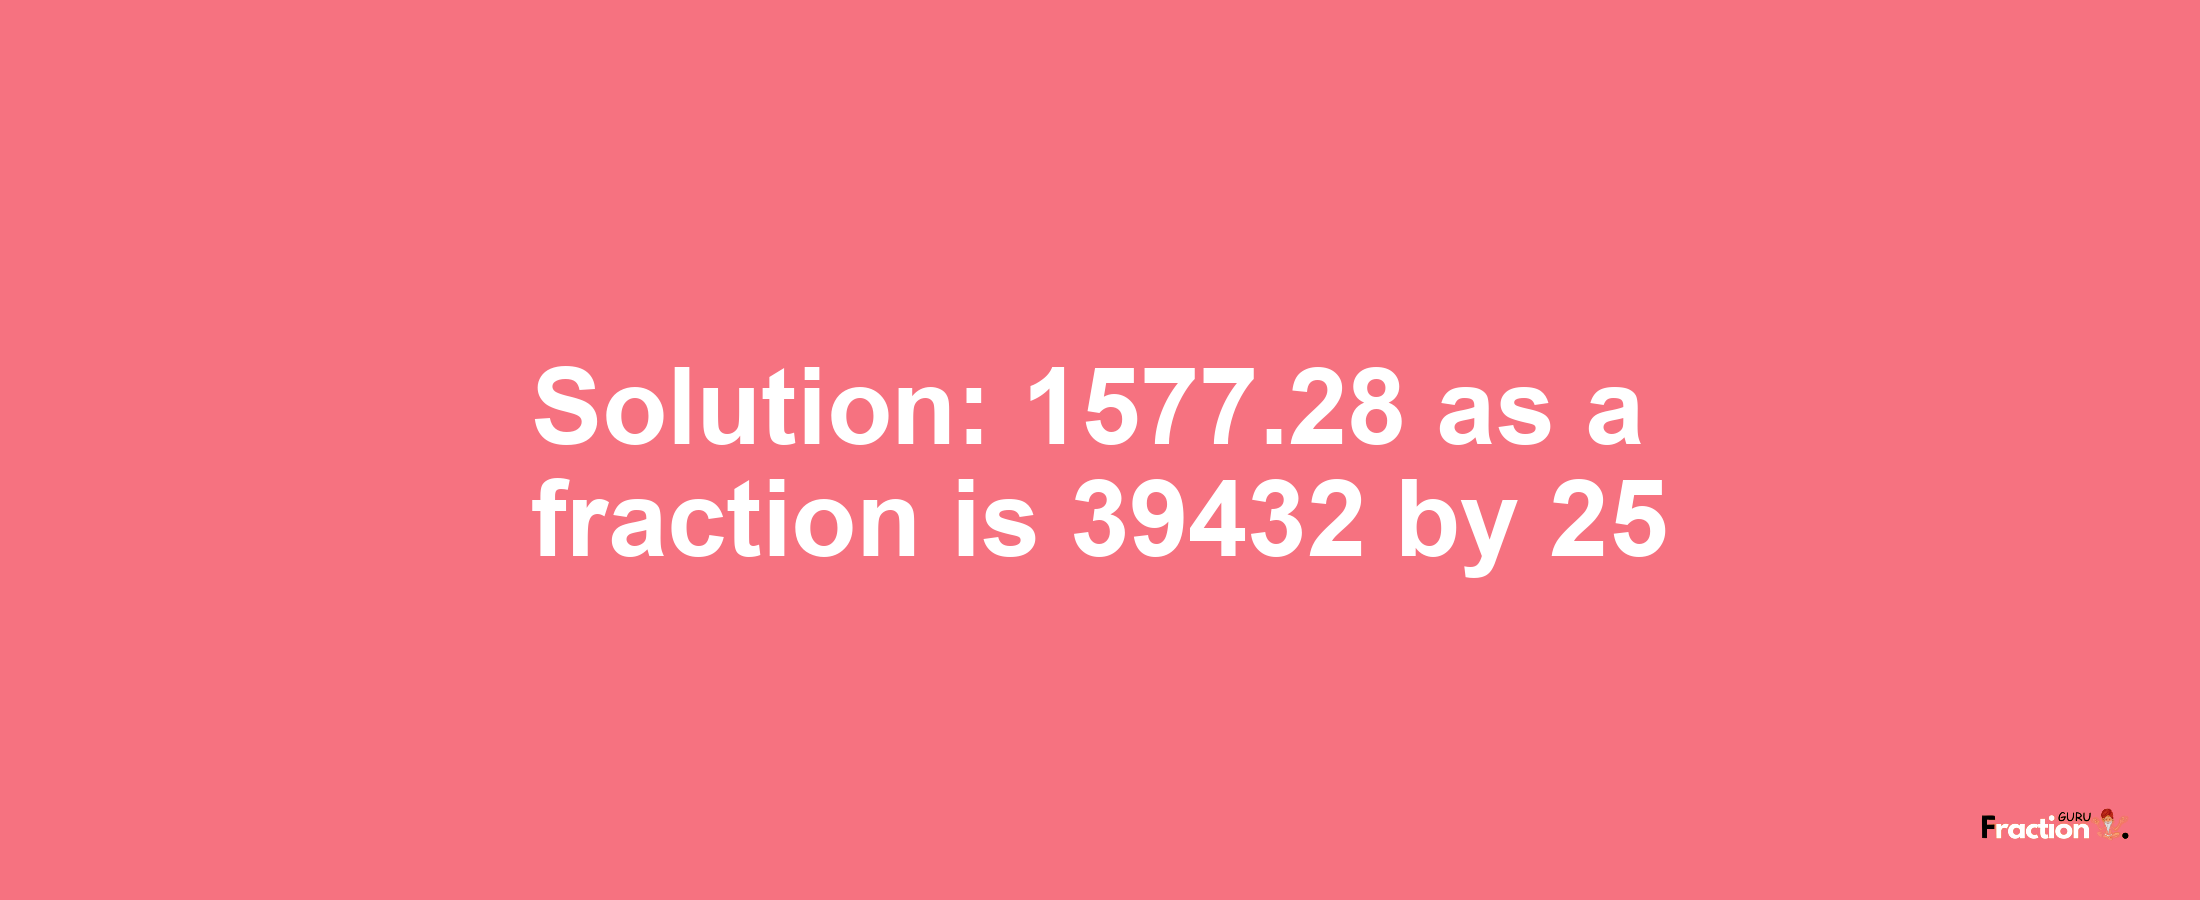 Solution:1577.28 as a fraction is 39432/25